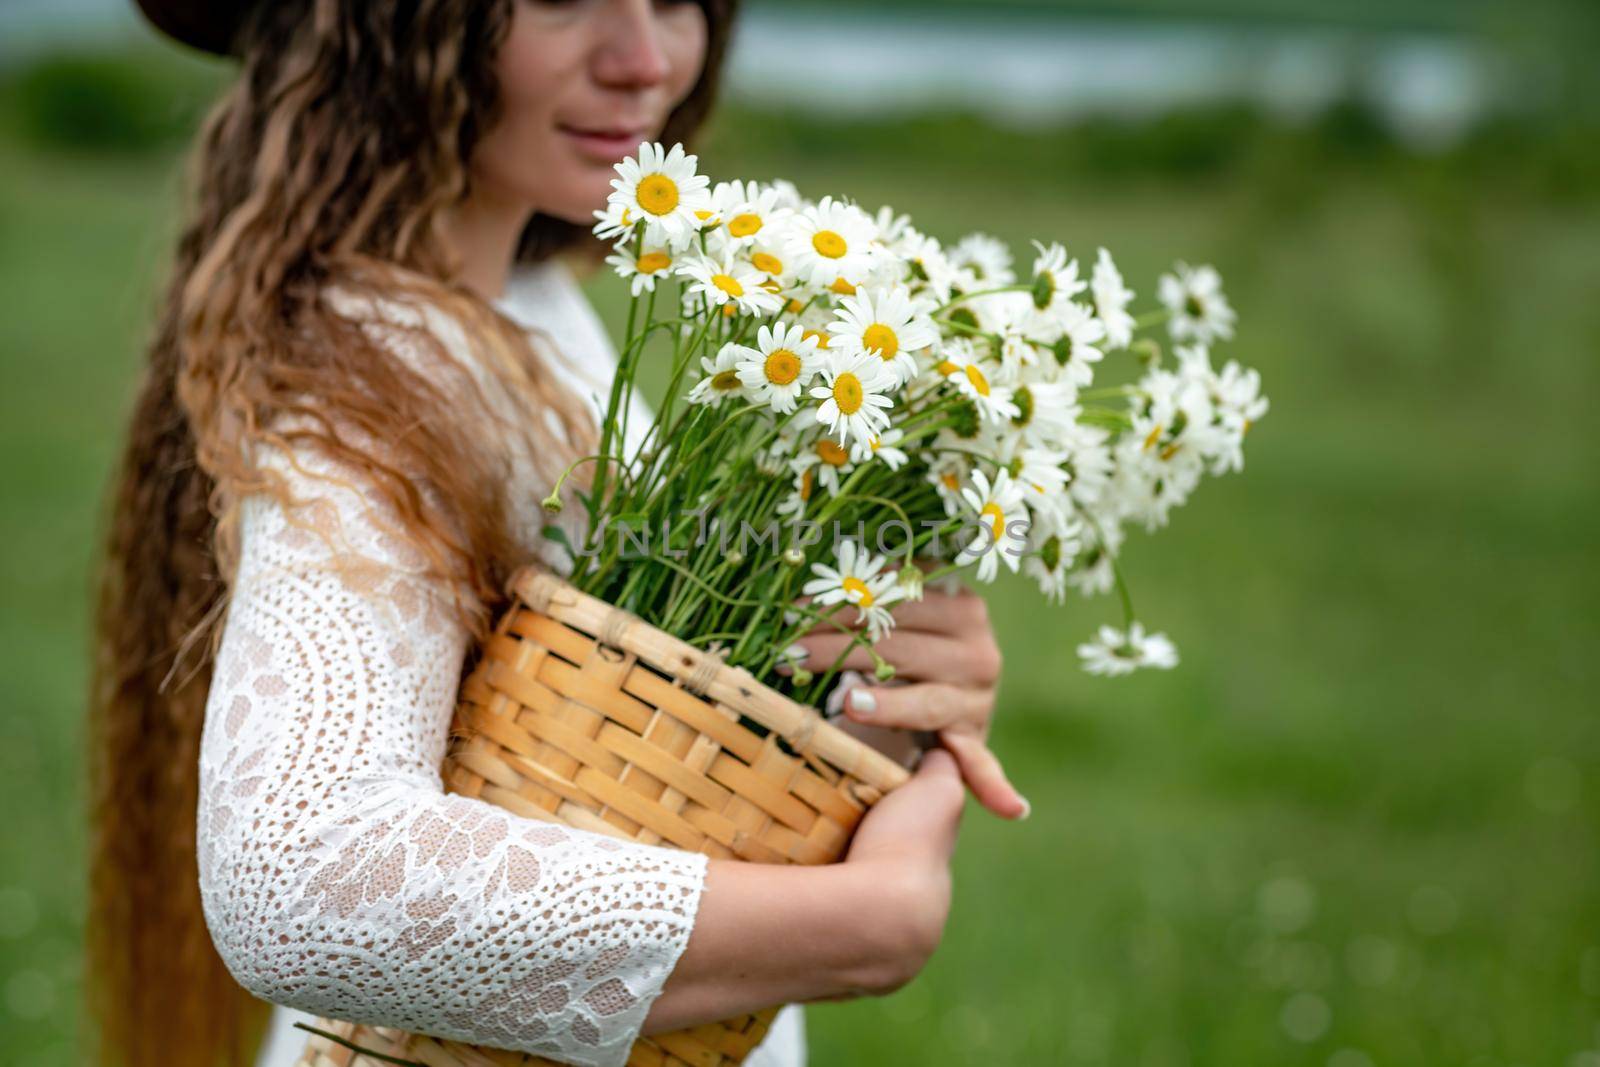 A middle-aged woman in a white dress and brown hat holds a lA middle-aged woman in a white dress and brown hat holds a basket in her hands with a large bouquet of daisies.arge bouquet of daisies in her hands. Wildflowers for congratulations.